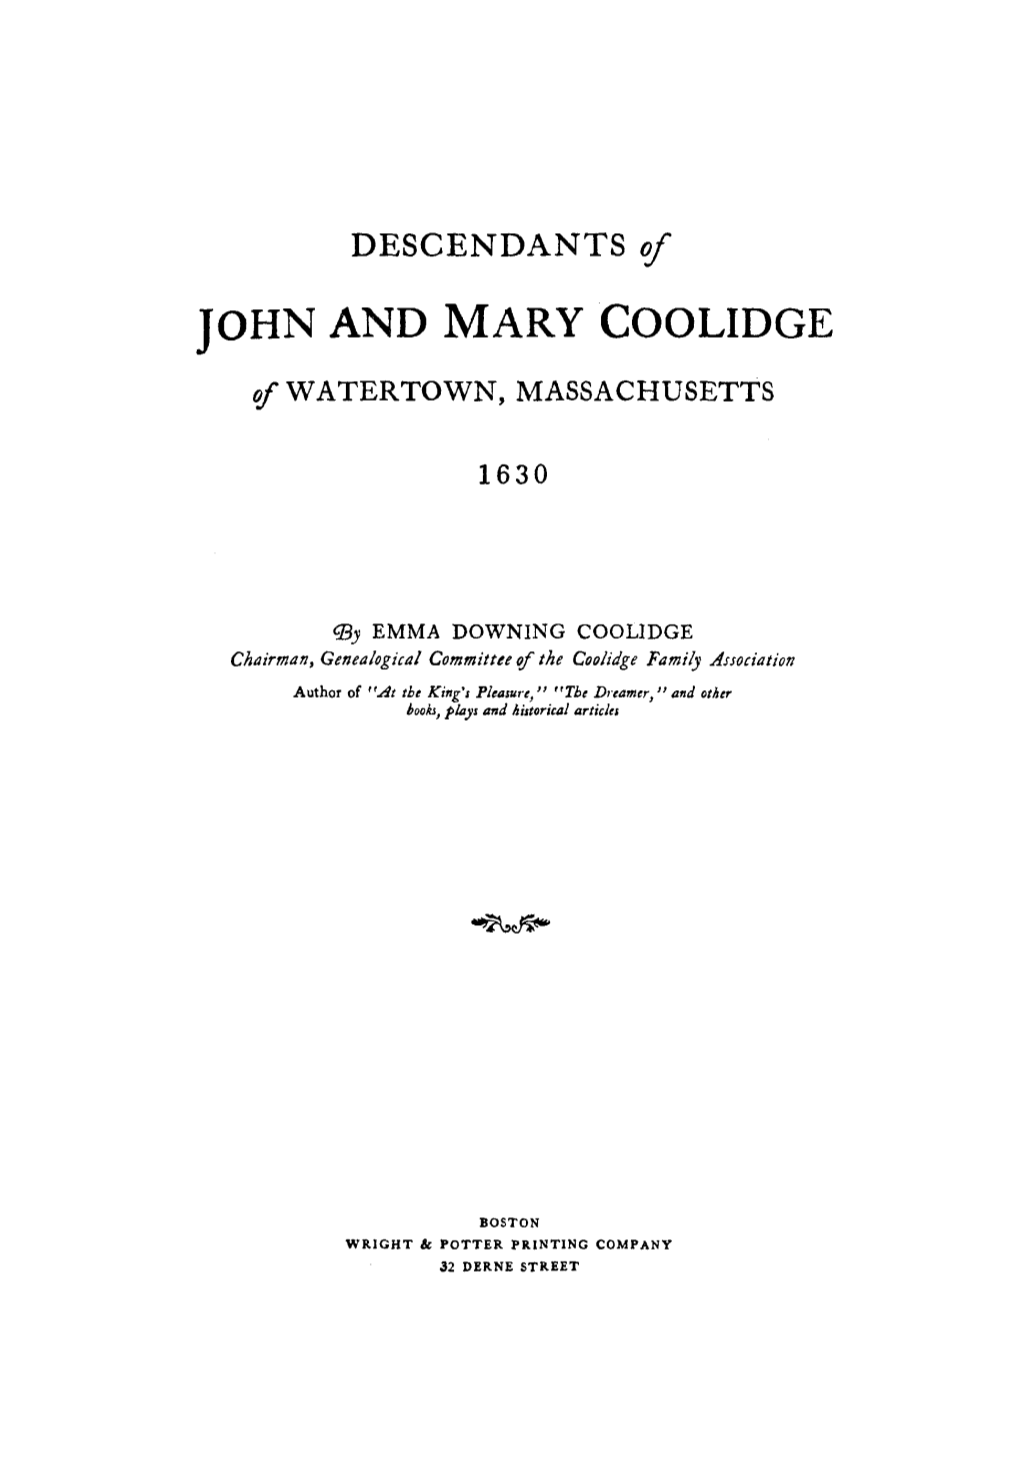 John and Mary Coolidge